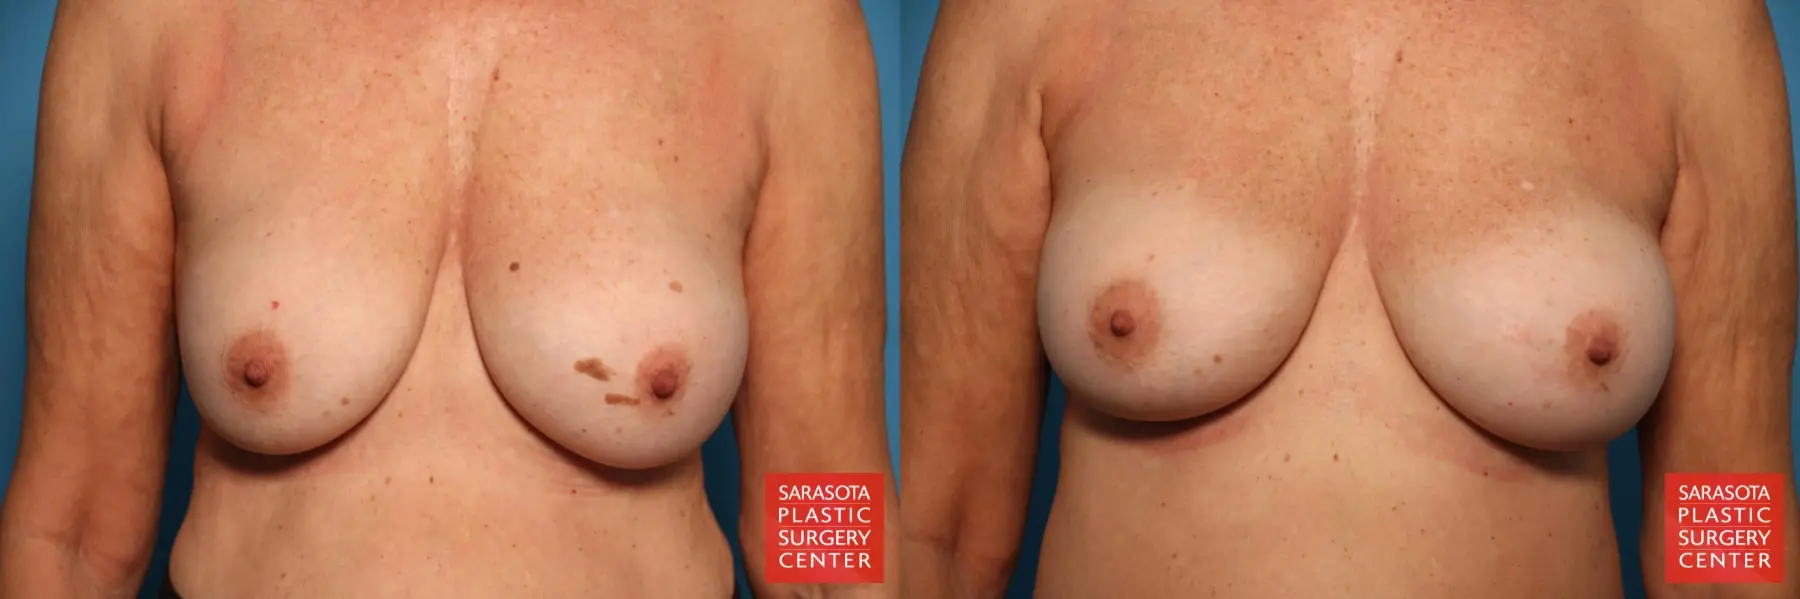 Breast Implant Removal/Replacement: Patient 12 - Before and After  